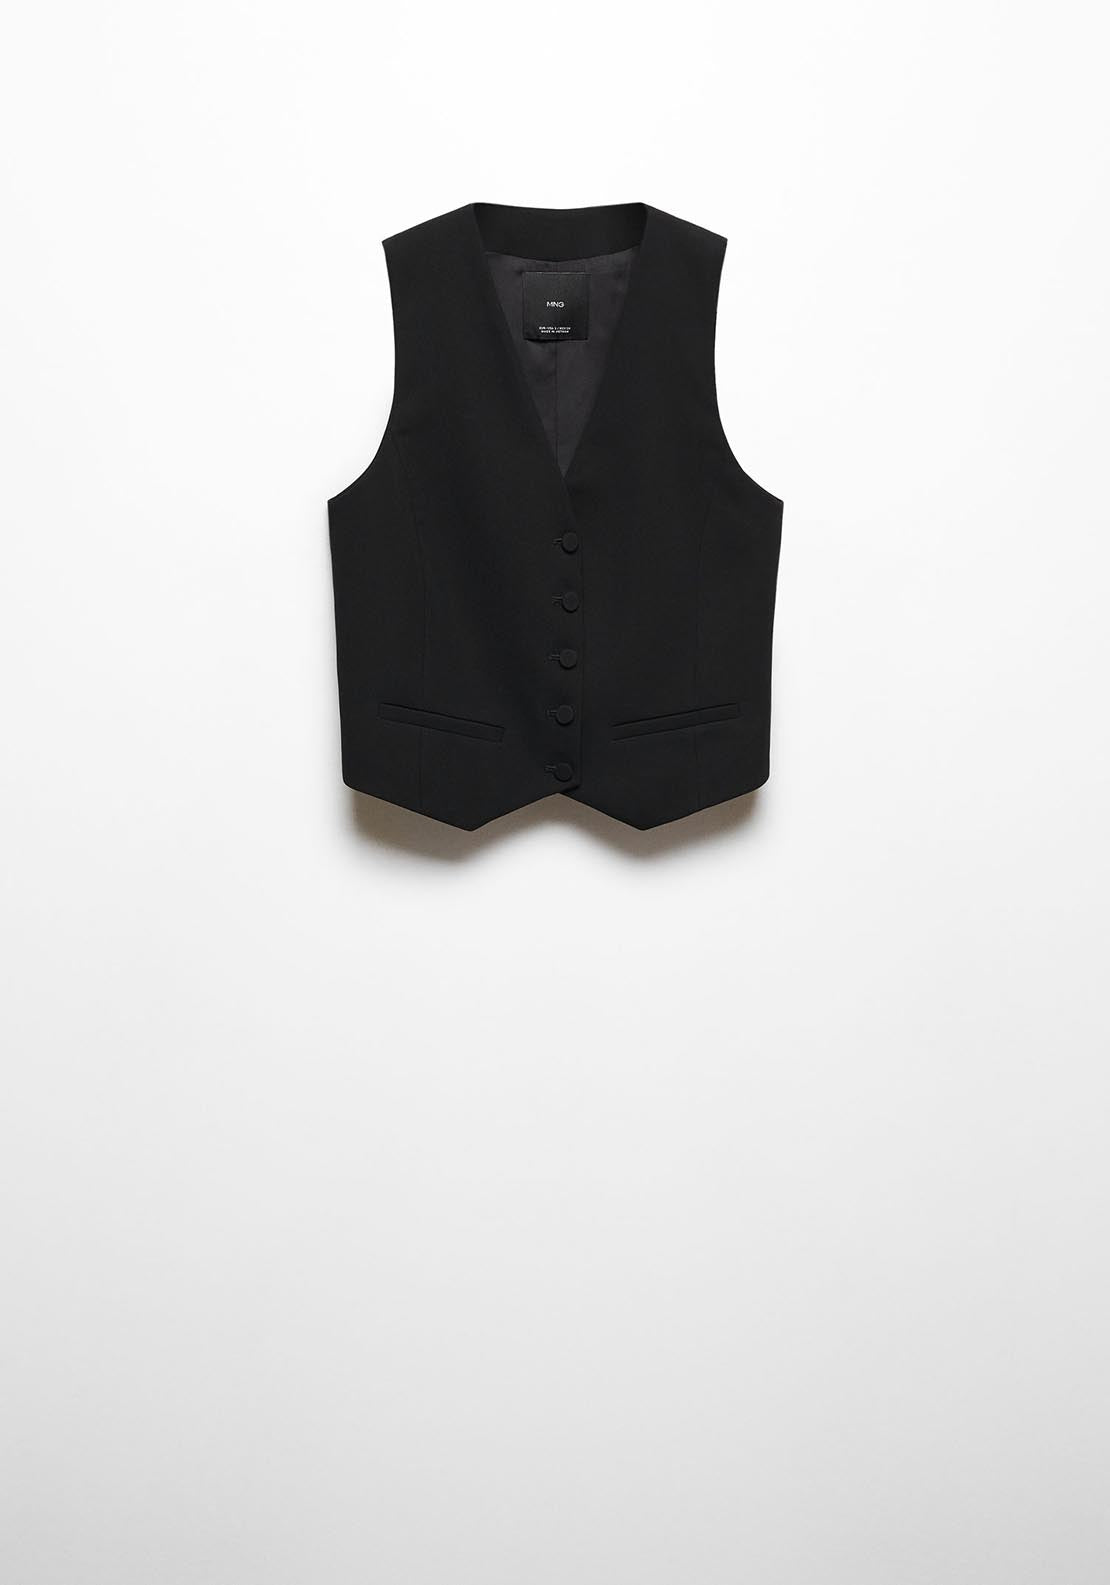 Mango Suit waistcoat with buttons 9 Shaws Department Stores